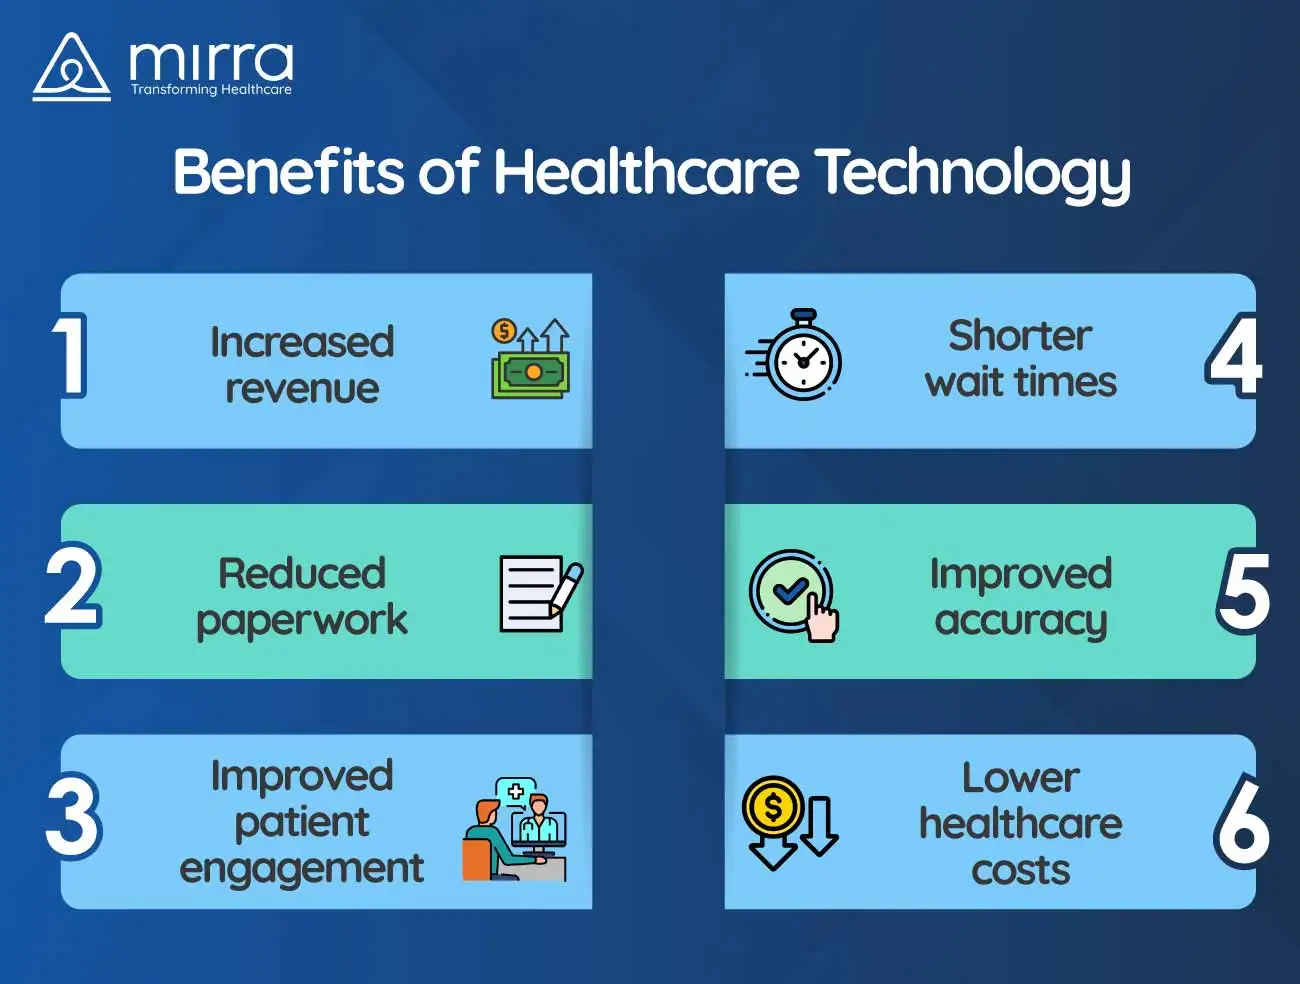 Benefits of healthcare technology